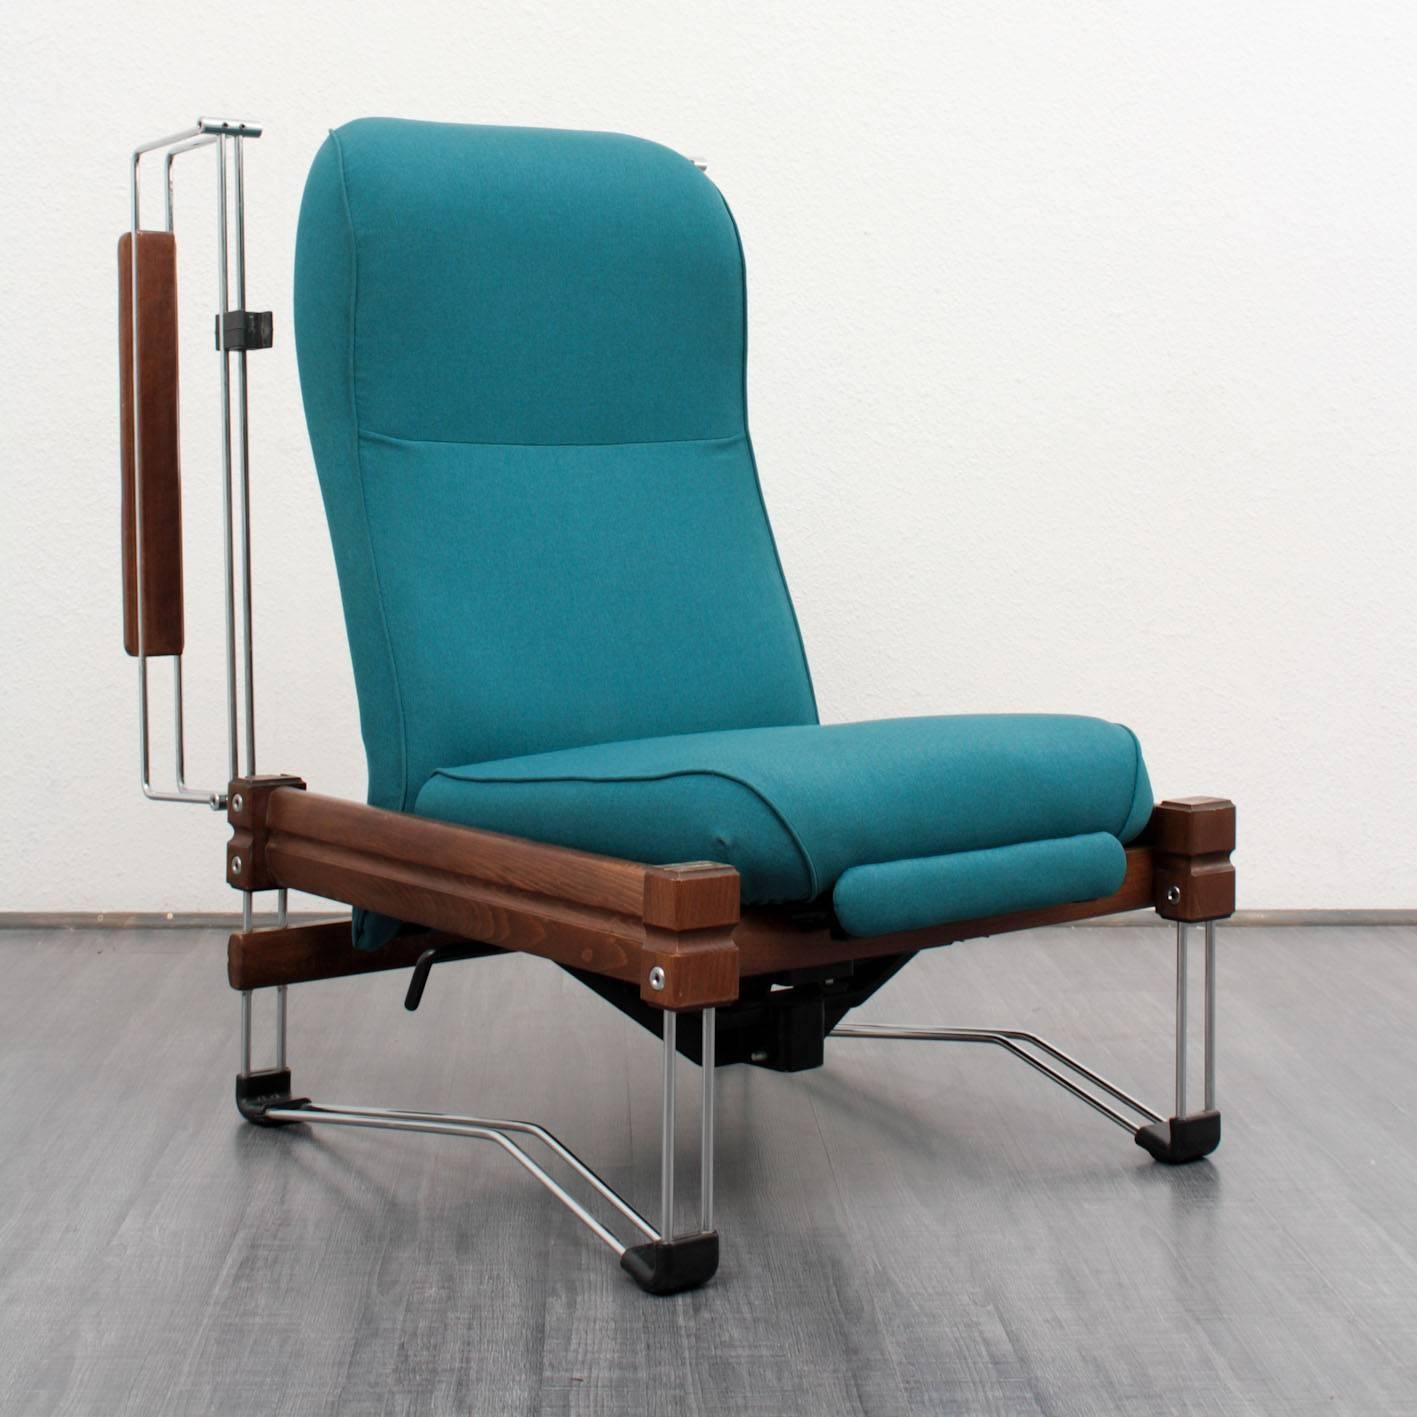 Extravagant lounge chair from the 1960s.

Delicate chrome frame with wooden armrests and struts. The armchair has various tilting positions. The upholstery has been newly covered with a high-quality upholstery fabric in petrol blue.

Good